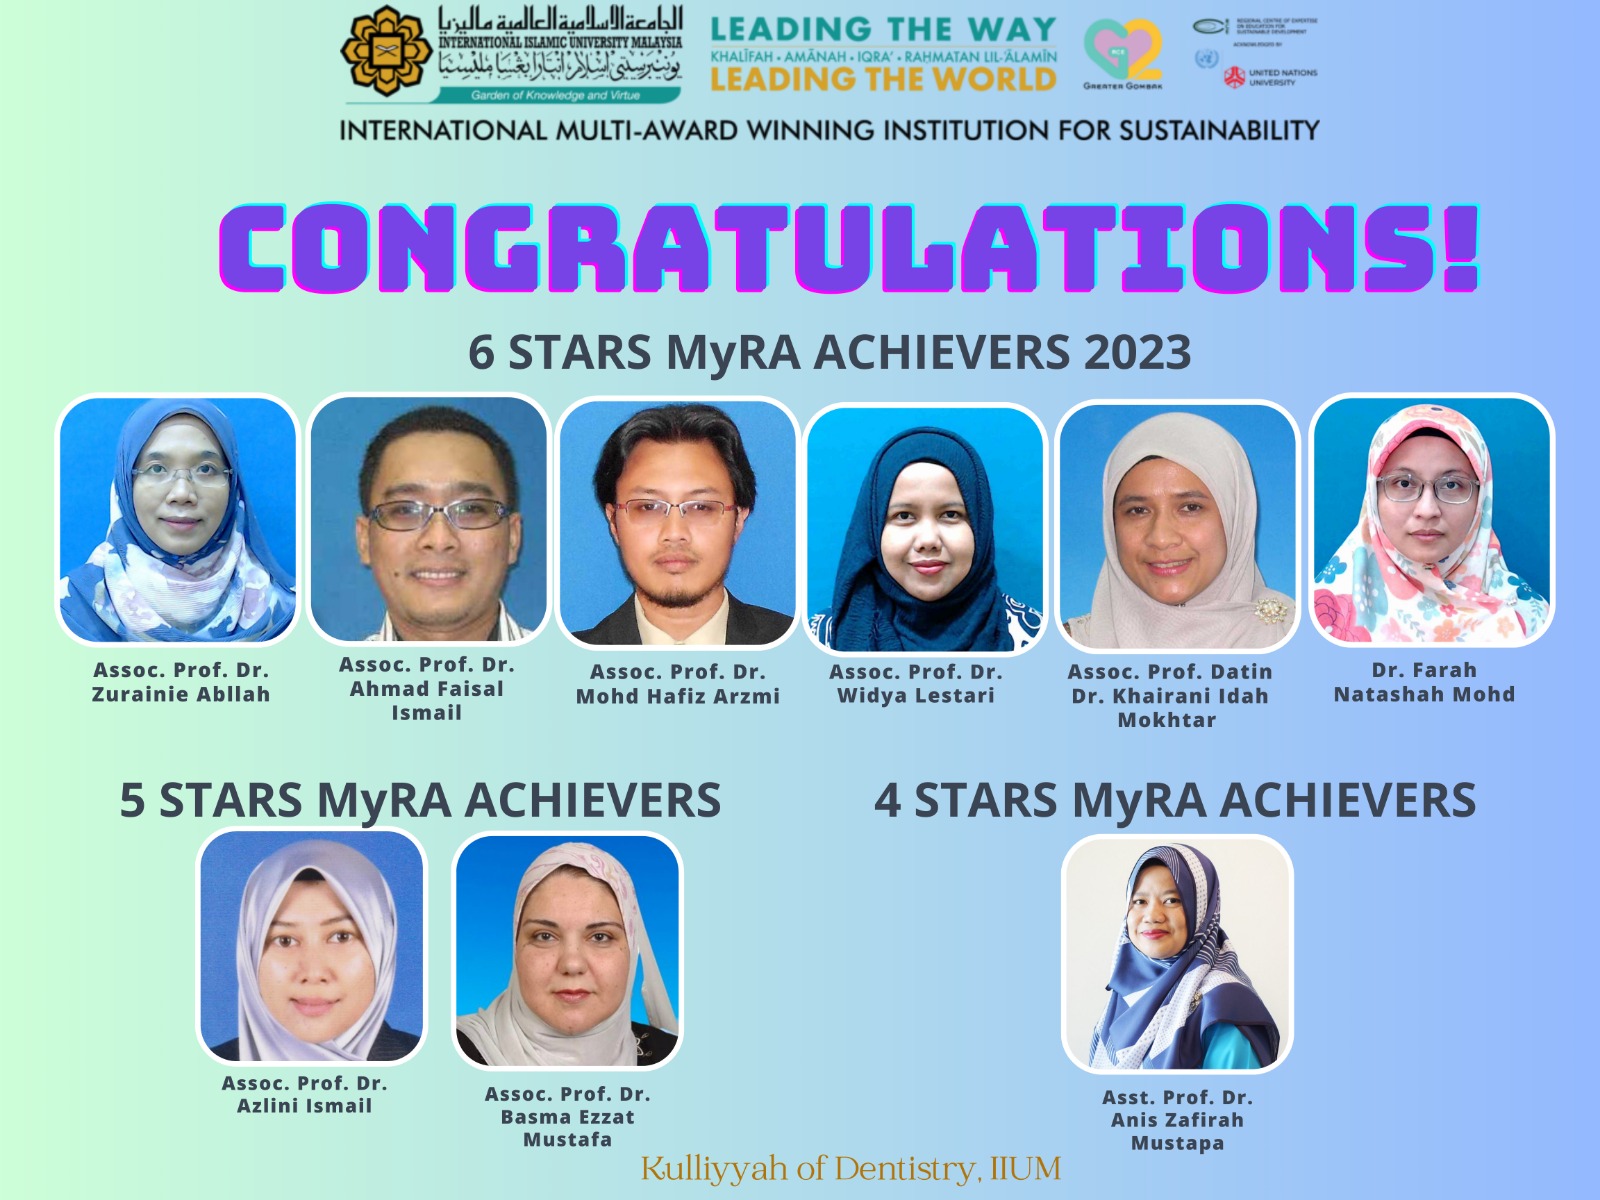 Congratulations to highest star achievers!